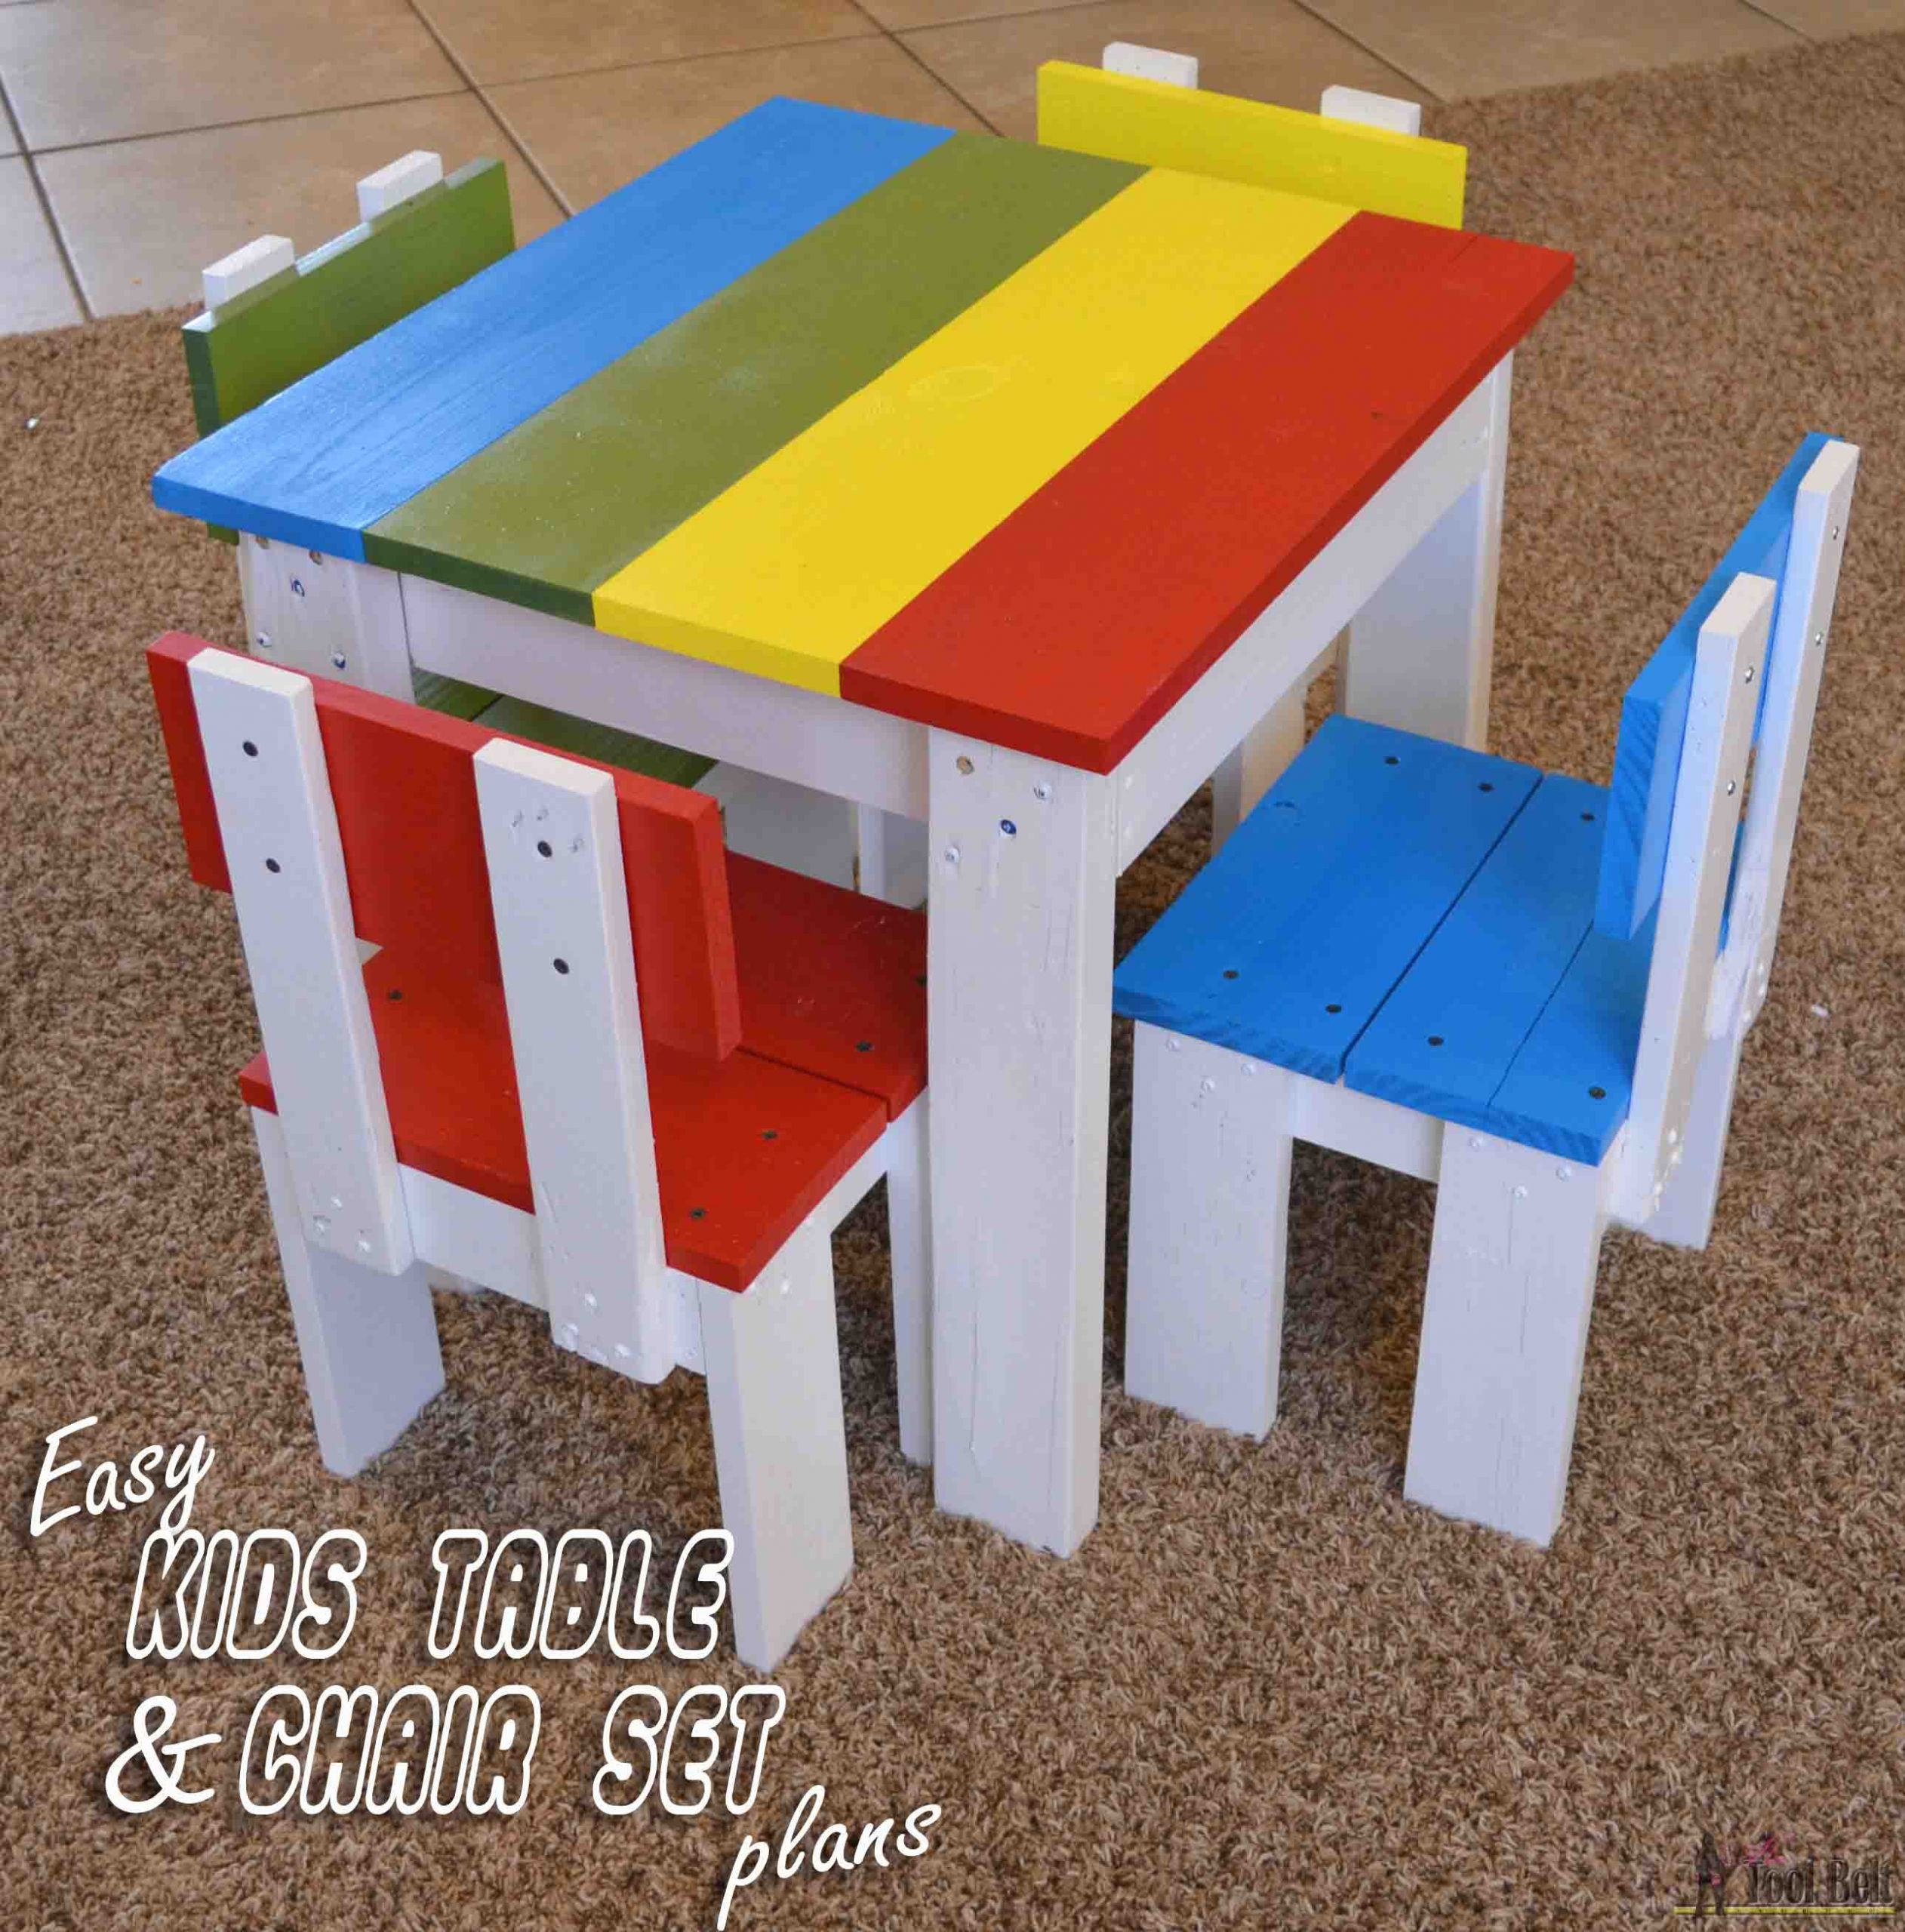 DIY Toddler Table And Chairs
 Simple Kid s Table and Chair Set Her Tool Belt